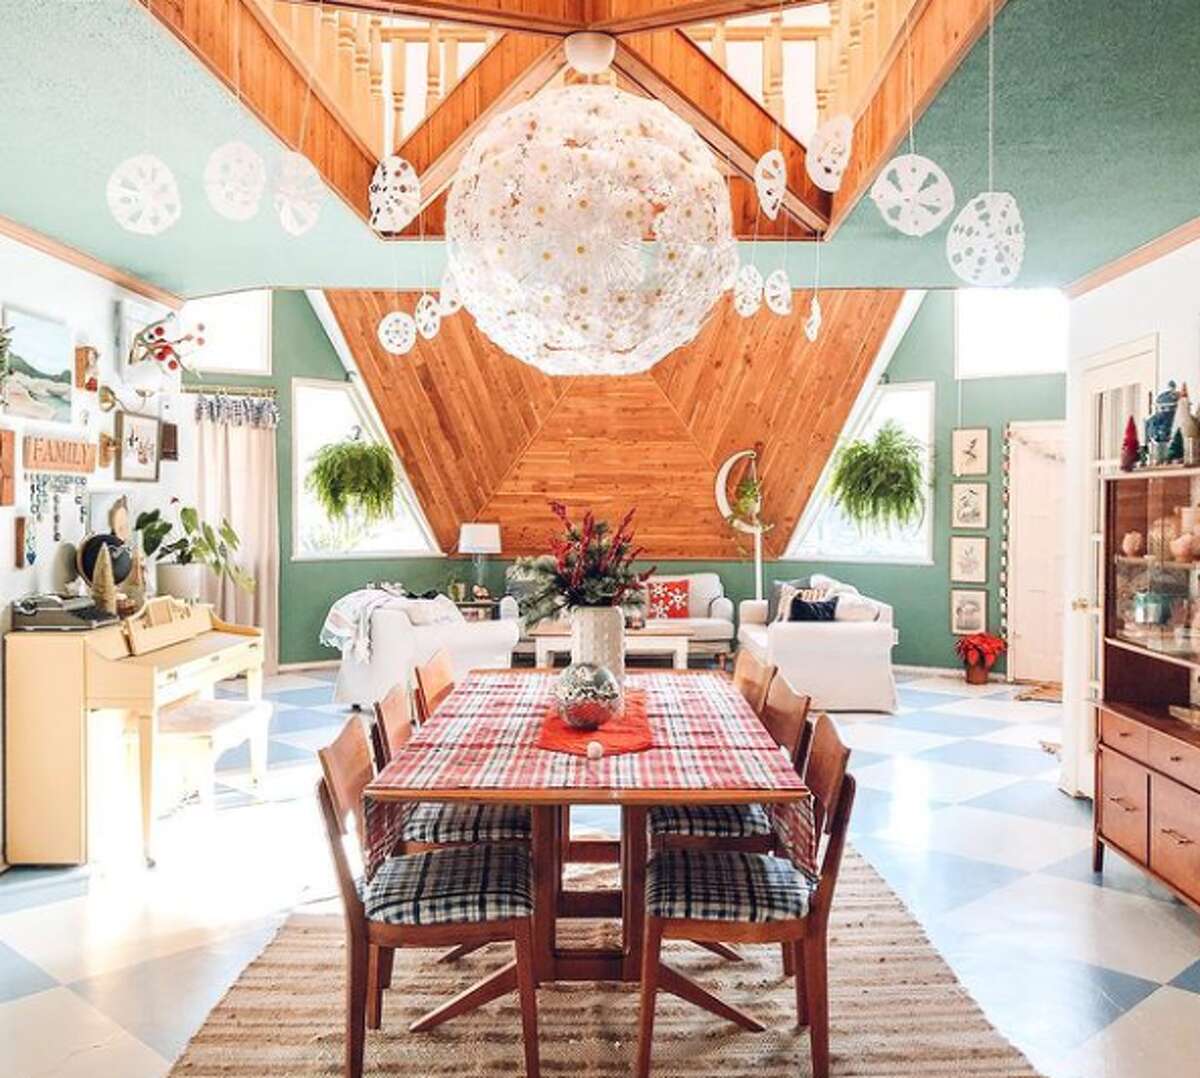 The Roznovsky family lives in this eclectic 1980s geodesic home in the North Side of San Antonio. 